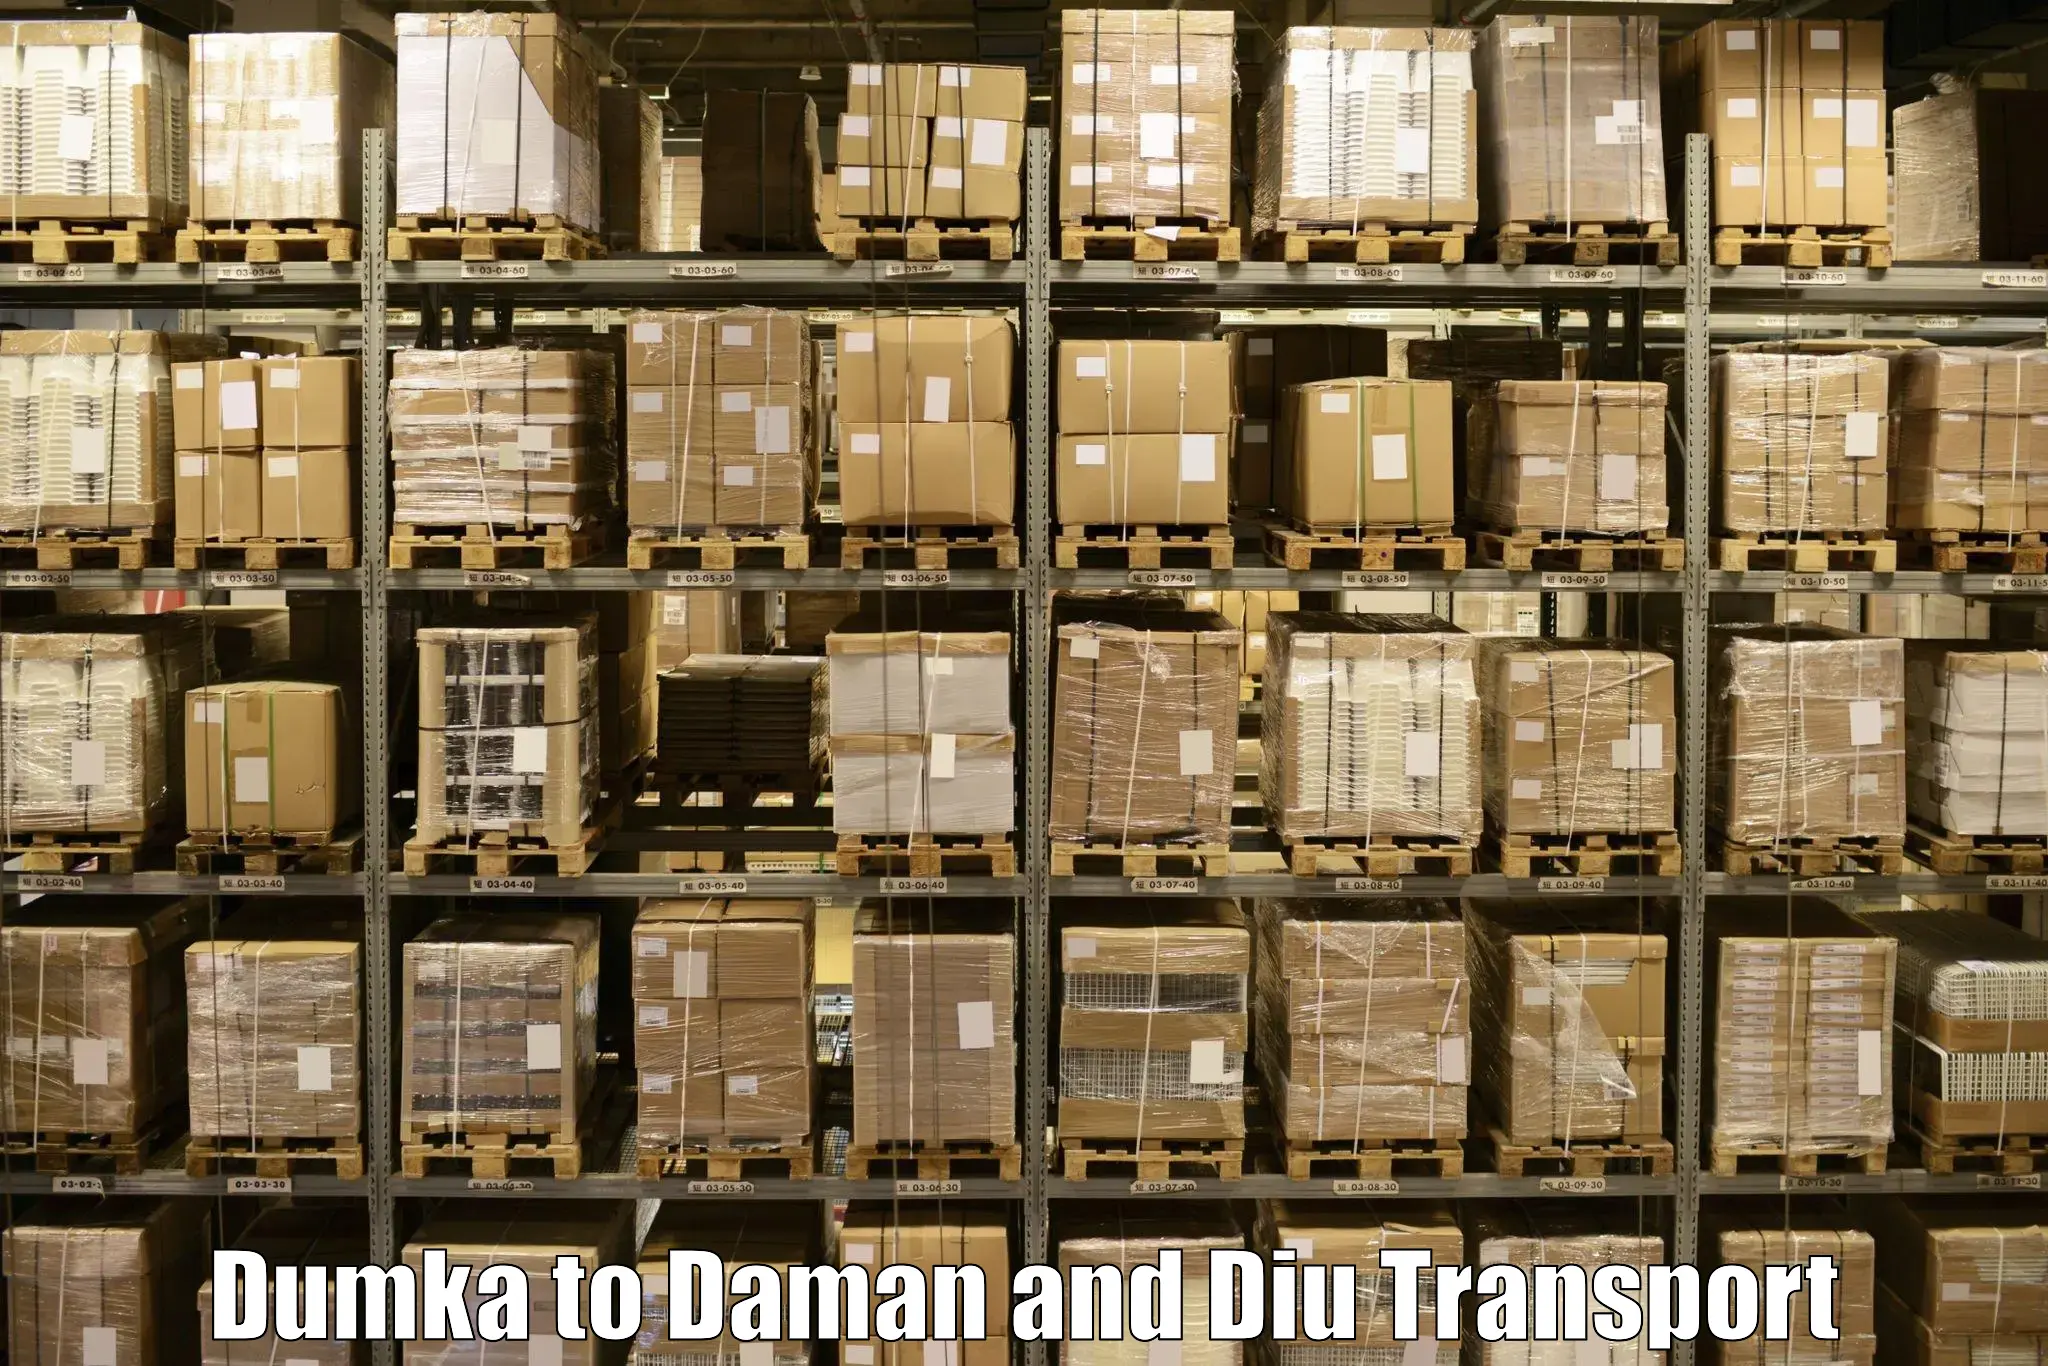 Transport bike from one state to another Dumka to Daman and Diu